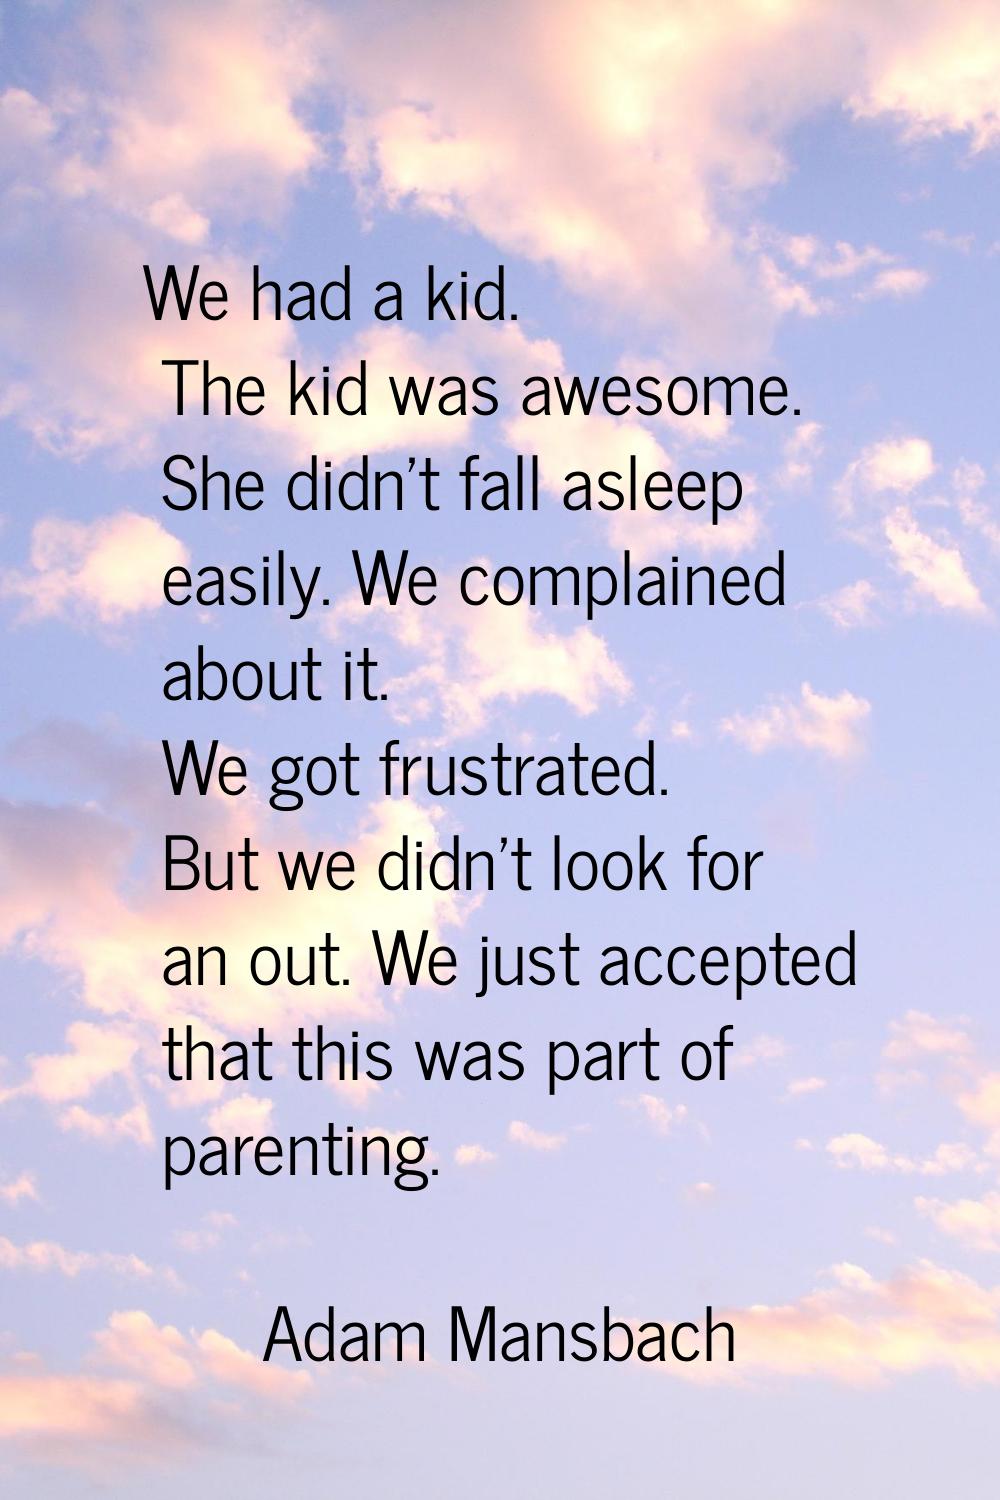 We had a kid. The kid was awesome. She didn't fall asleep easily. We complained about it. We got fr